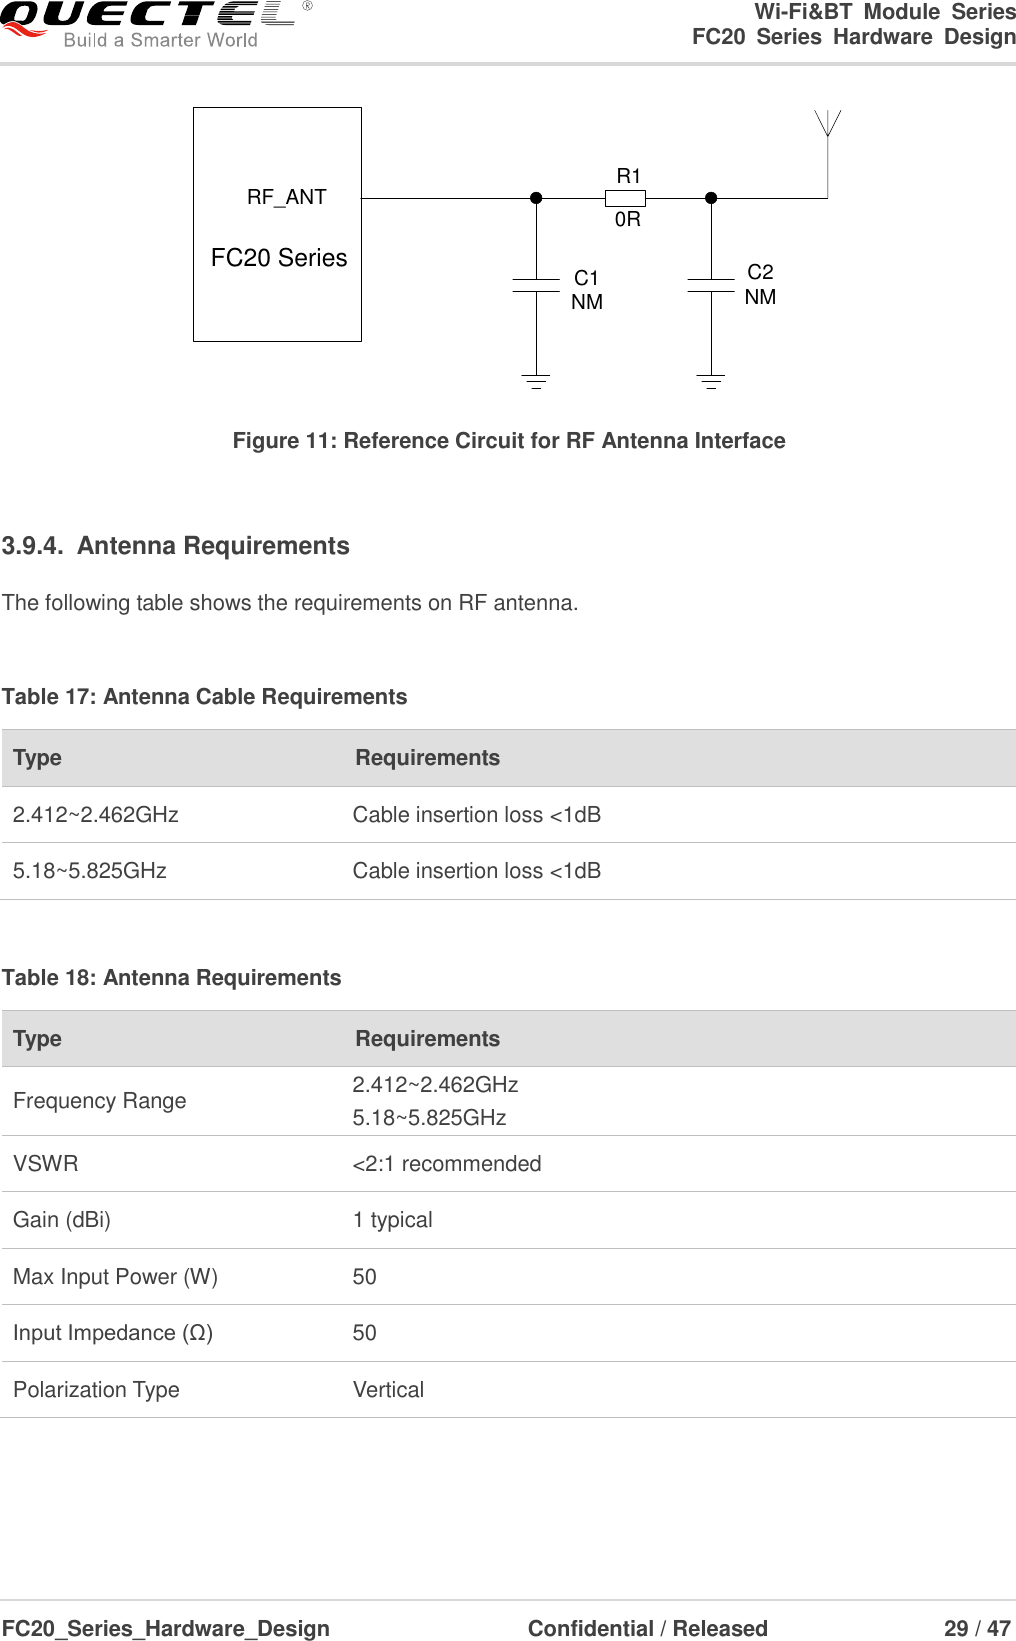                                                                        Wi-Fi&amp;BT  Module  Series                                                               FC20  Series  Hardware  Design  FC20_Series_Hardware_Design                                    Confidential / Released                    29 / 47    RF_ANT R1   C1NMC2NMFC20 Series0R Figure 11: Reference Circuit for RF Antenna Interface  3.9.4.  Antenna Requirements The following table shows the requirements on RF antenna.  Table 17: Antenna Cable Requirements Type Requirements 2.412~2.462GHz Cable insertion loss &lt;1dB 5.18~5.825GHz Cable insertion loss &lt;1dB  Table 18: Antenna Requirements Type Requirements Frequency Range 2.412~2.462GHz   5.18~5.825GHz VSWR &lt;2:1 recommended Gain (dBi) 1 typical Max Input Power (W) 50 Input Impedance (Ω) 50 Polarization Type Vertical  